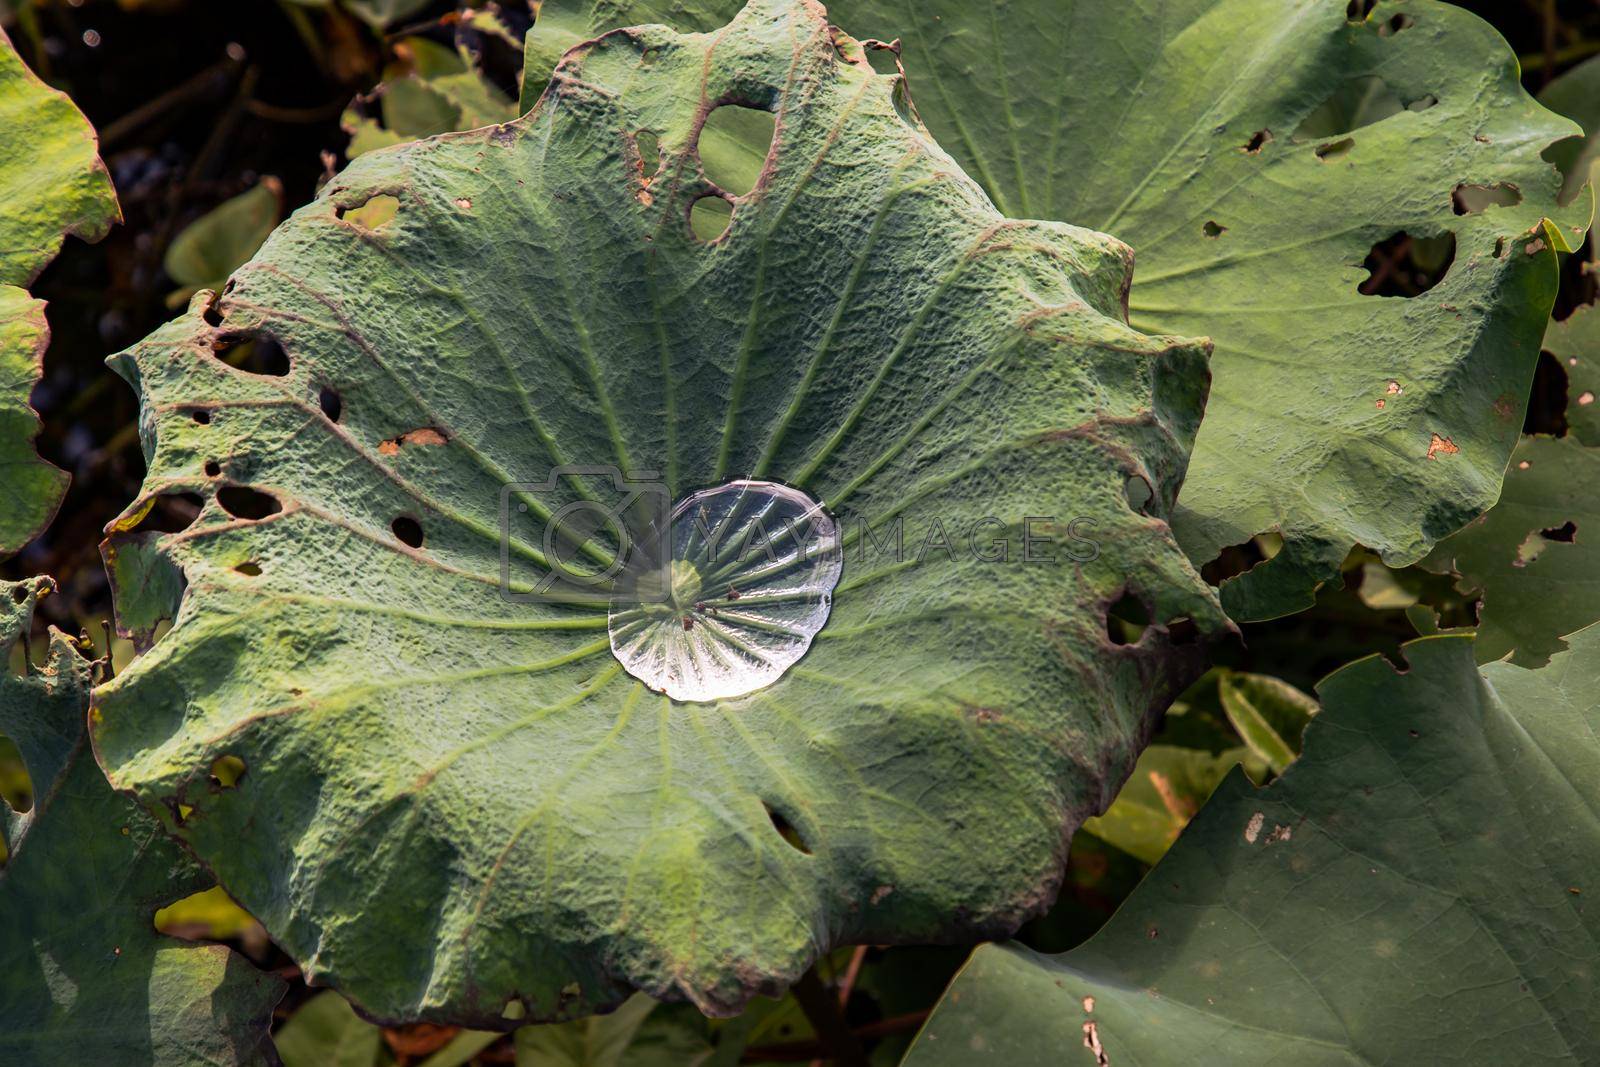 Royalty free image of Close-up of Water droplets on surface of green water lily leaves floating in pond.  by tosirikul